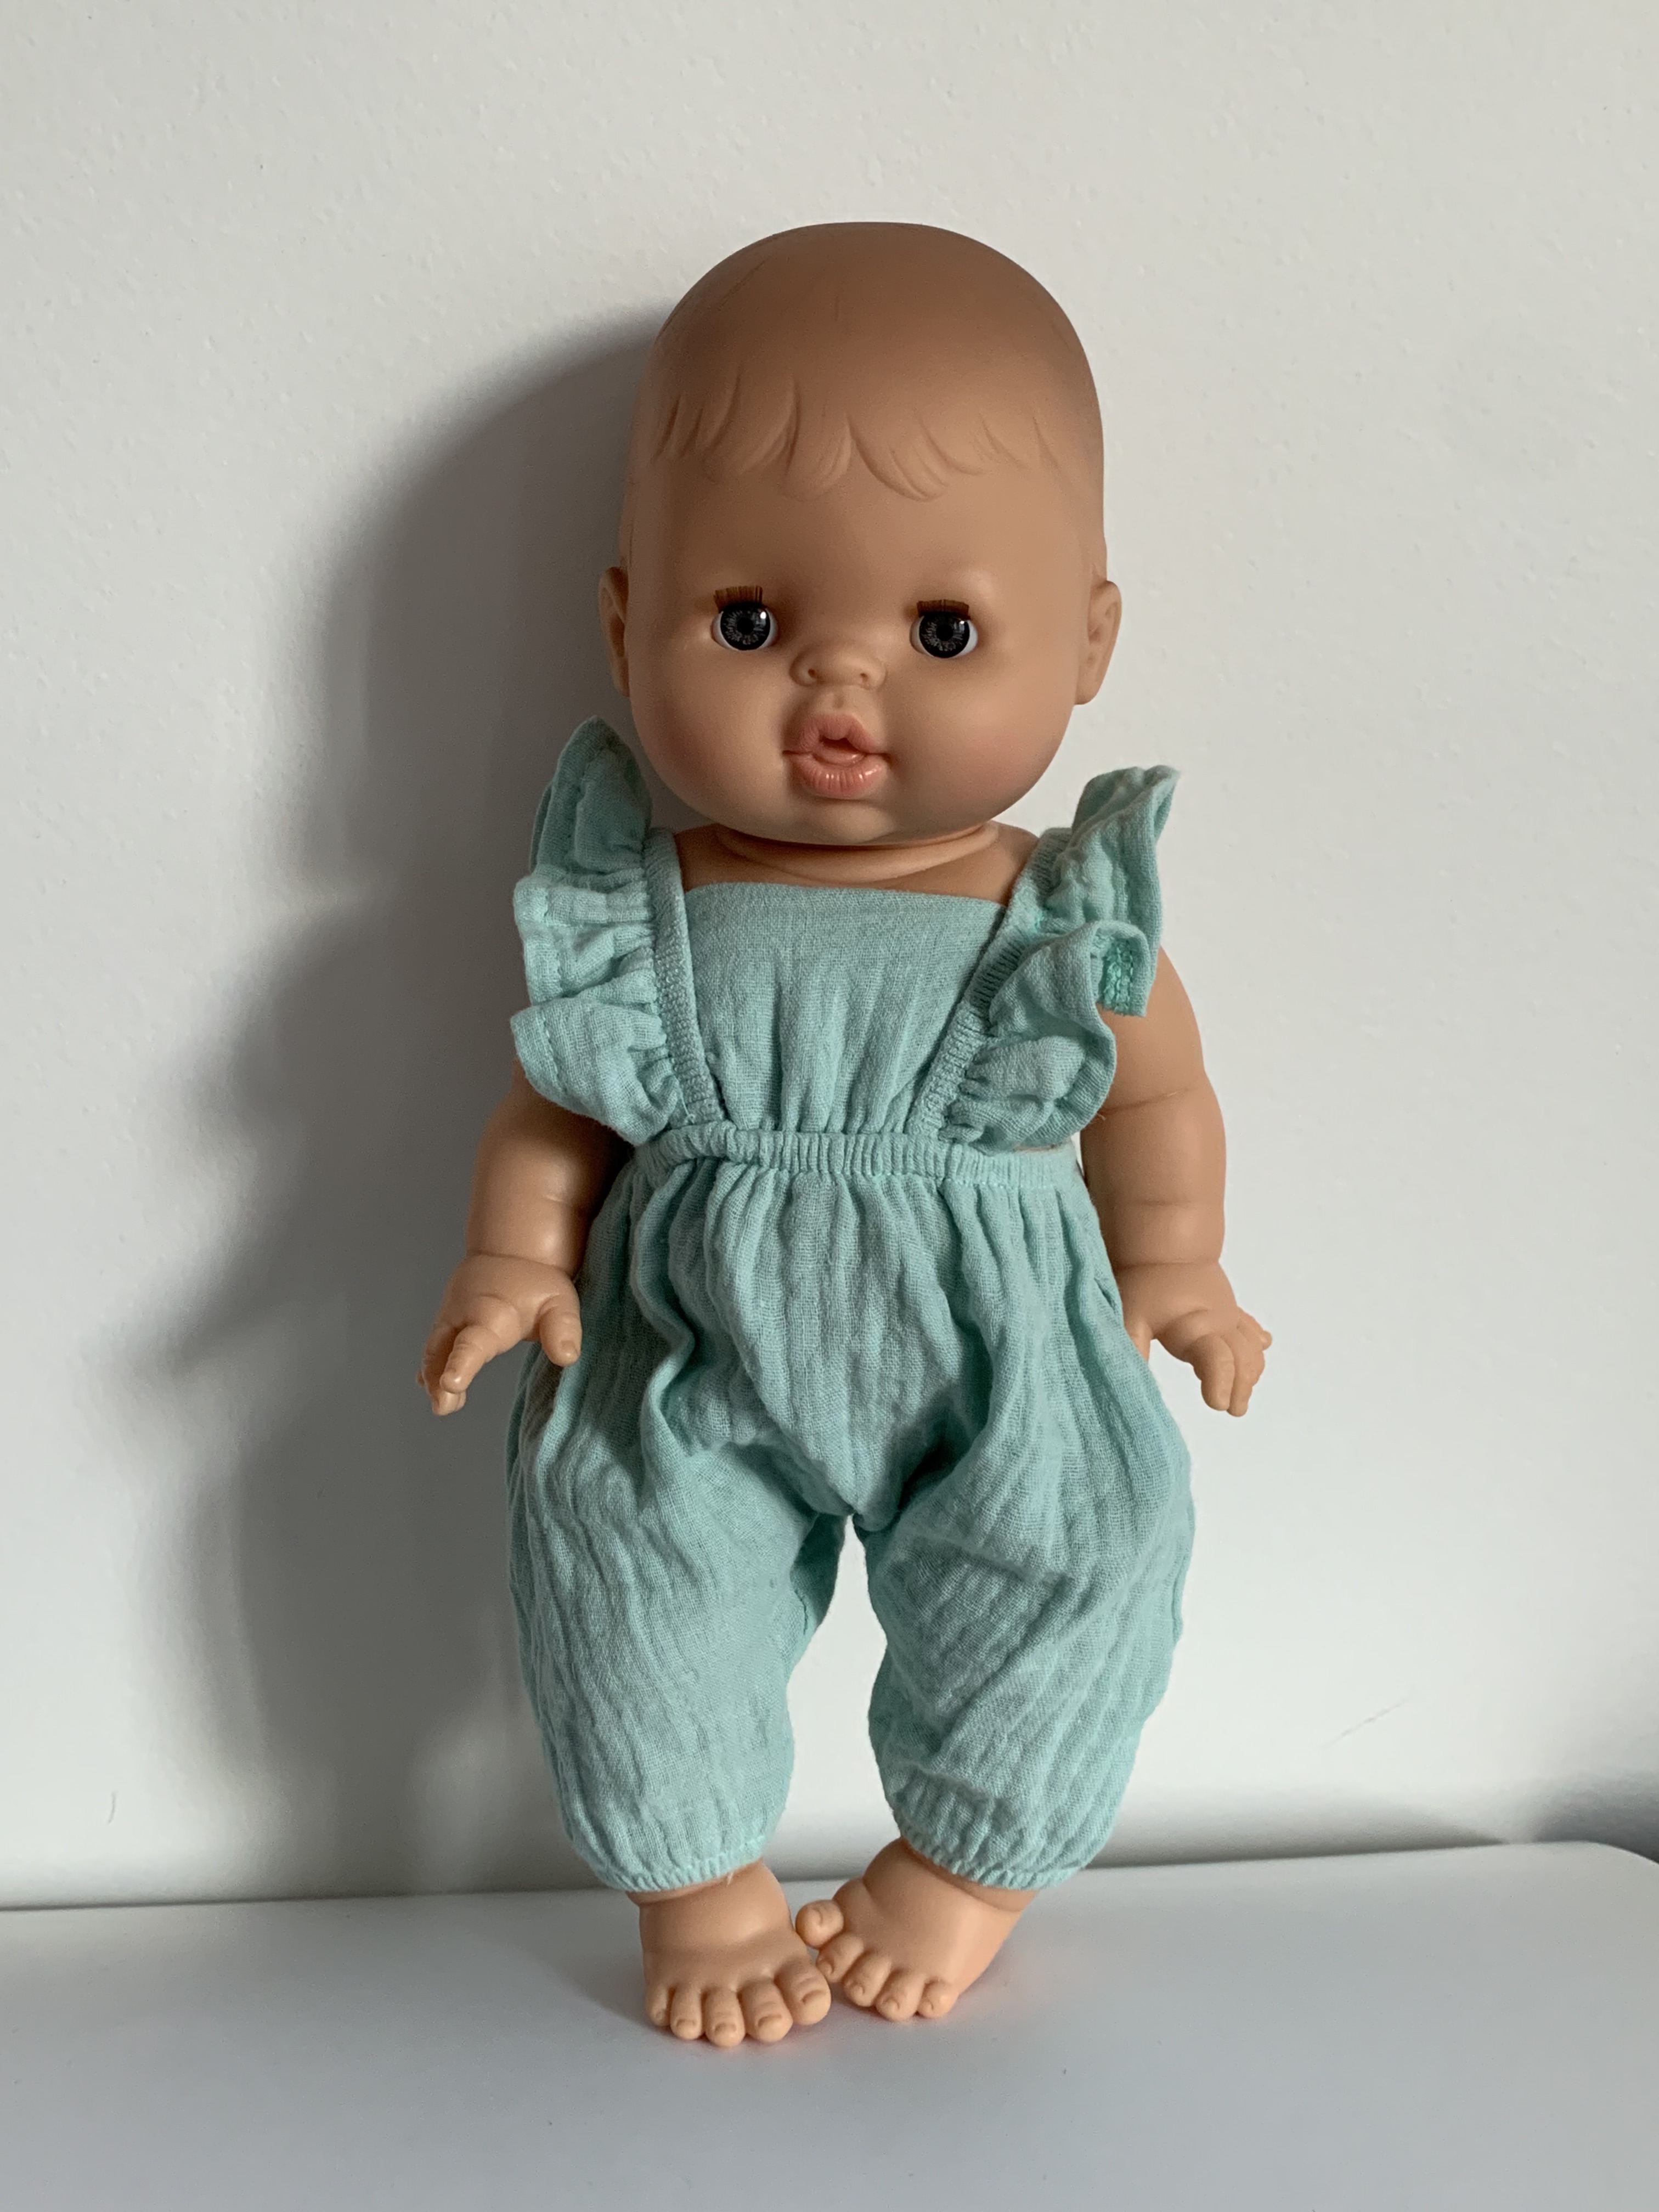 Minikane Paola Reina Doll with Her Pretty Turquoise Romper